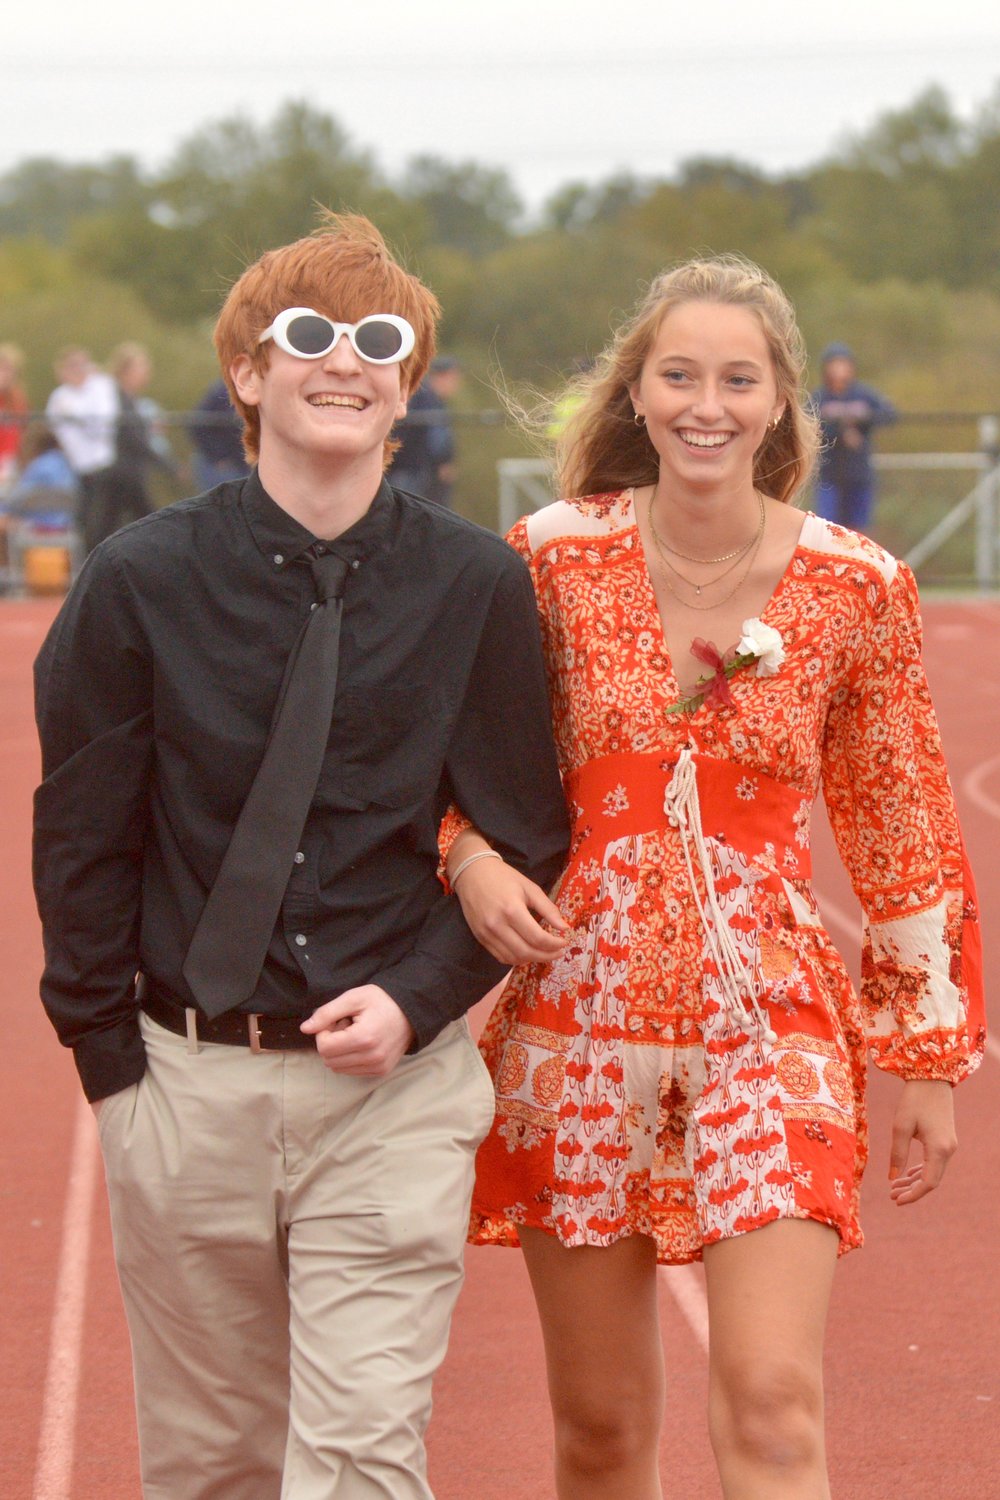 Joe Cawley and Grace Van Patten, Homecoming king and queen, are introduced at halftime of the Portsmouth High football game against East Greenwich.